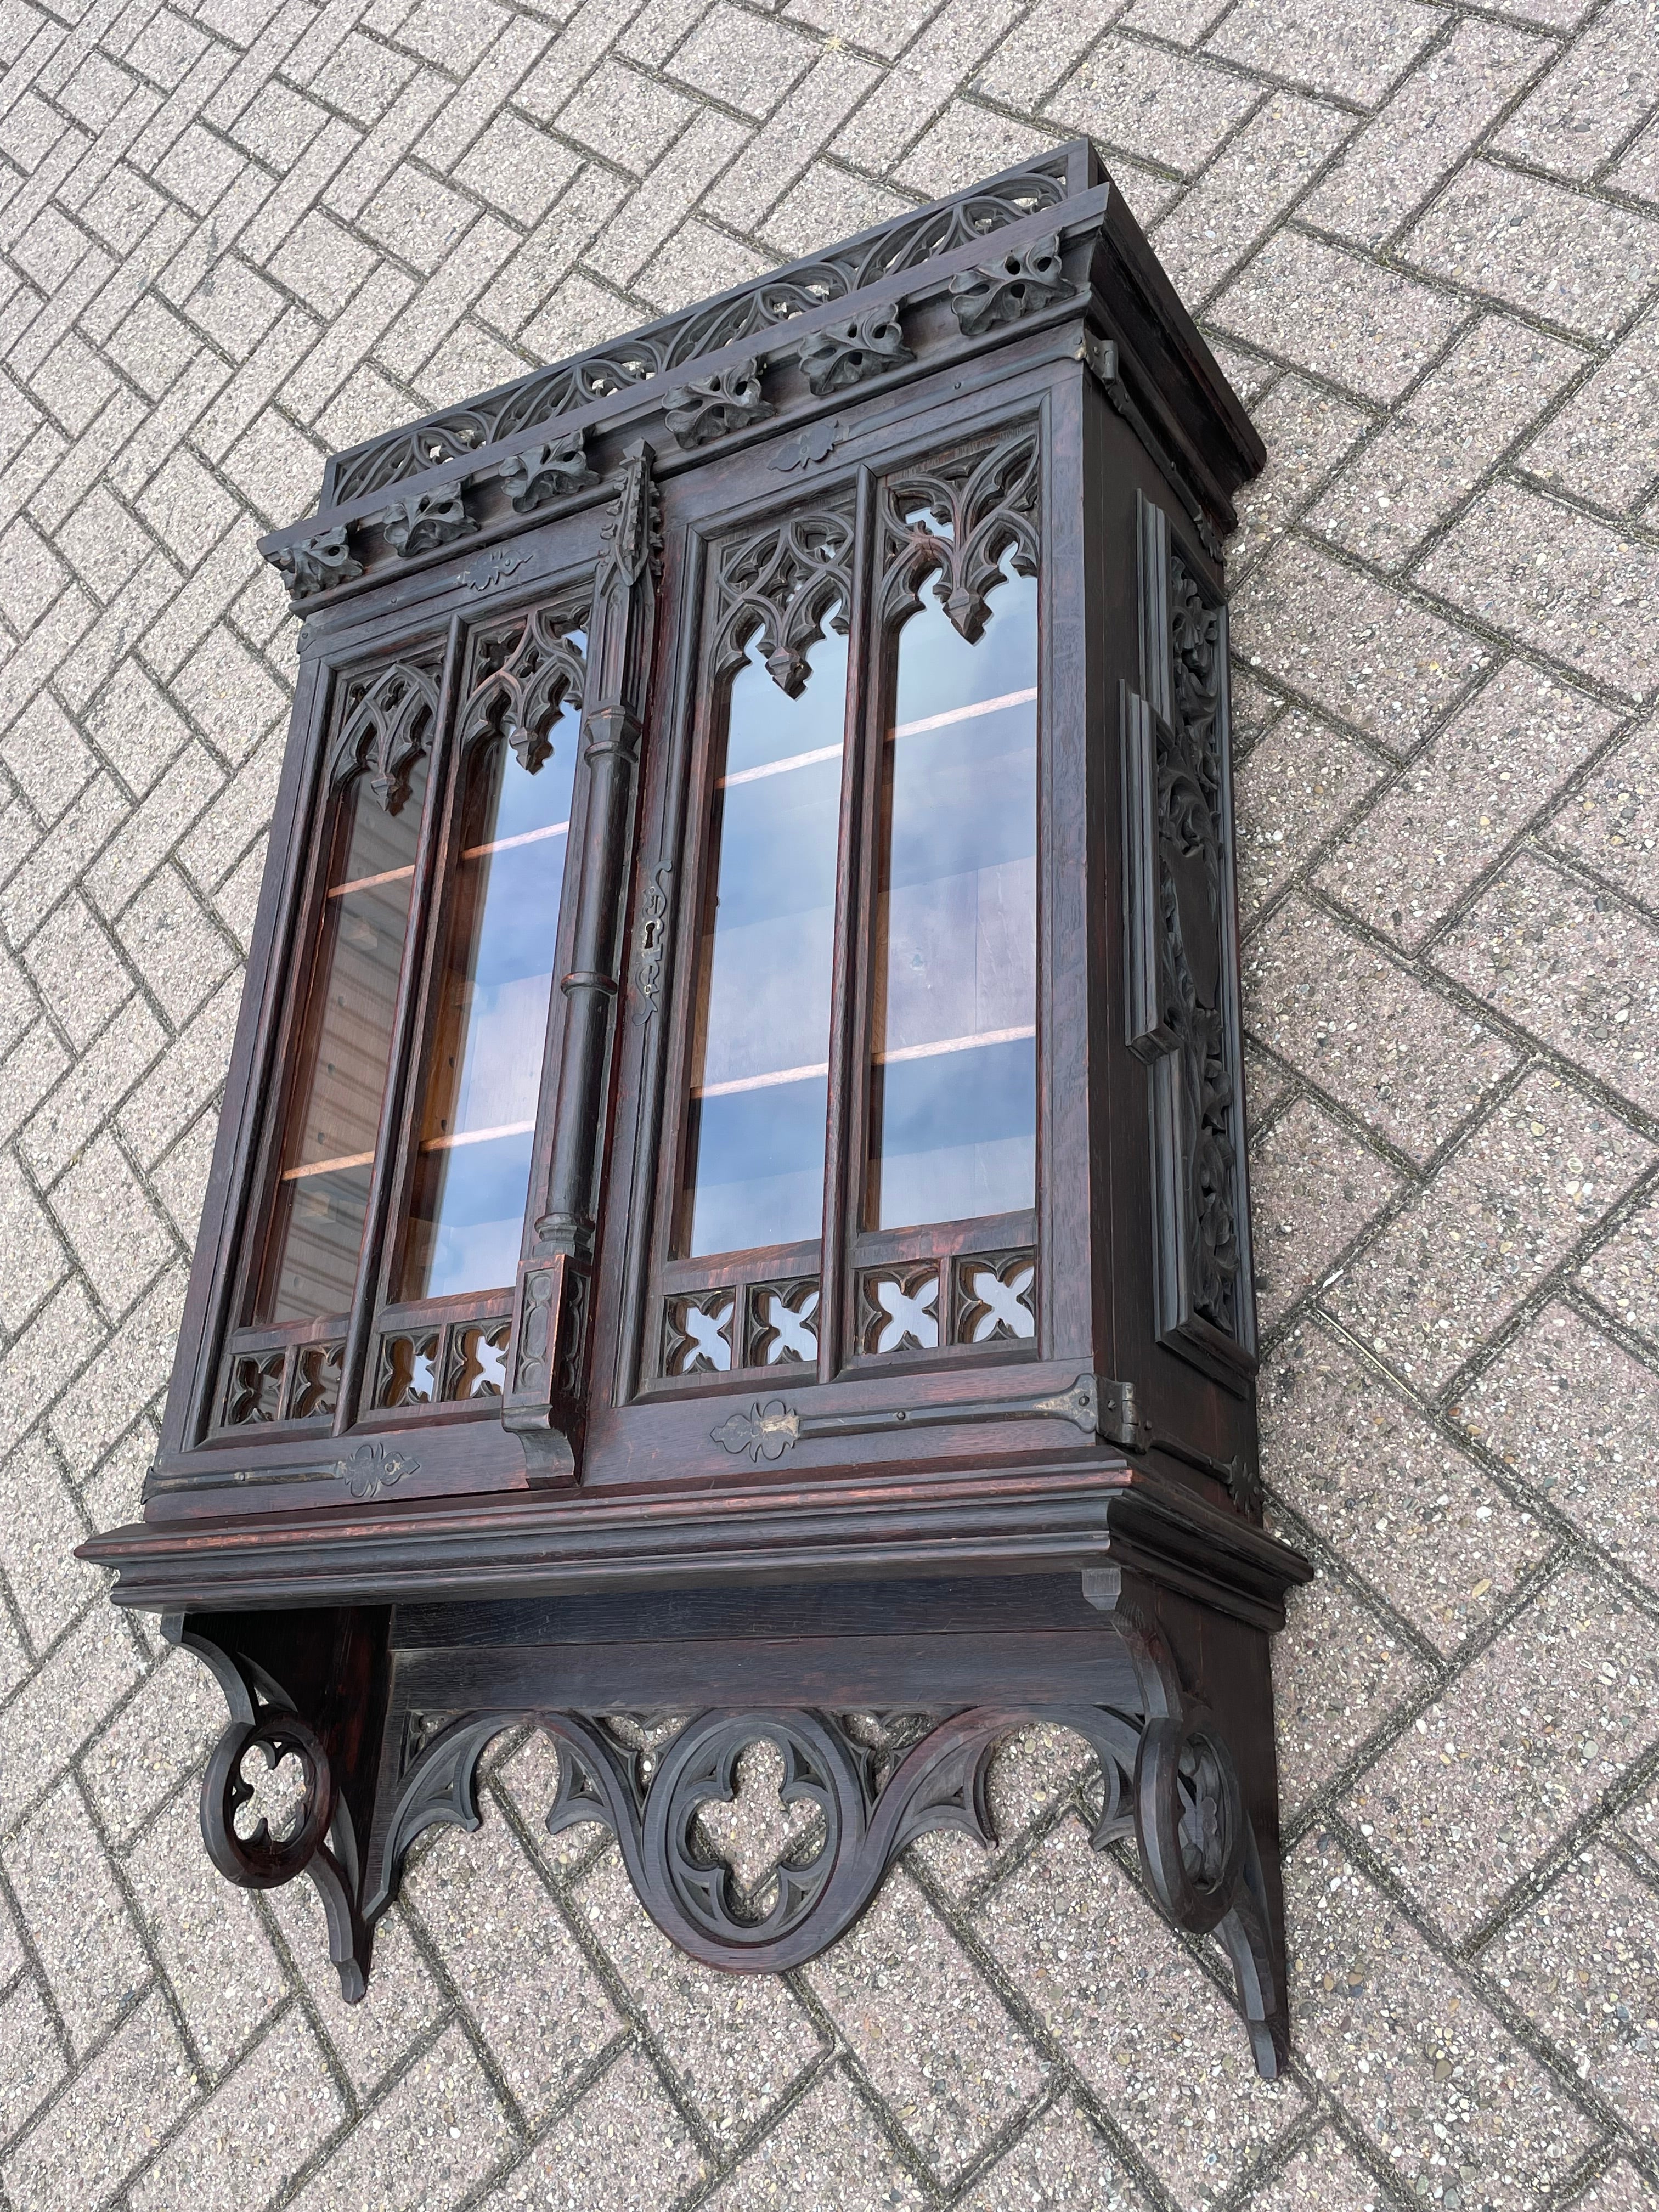 Unique and amazing wall cabinet with Gothic church window paneled doors and more.

This handcrafted and rare Gothic Revival wall cabinet from the late 1800s is another one of our magnificent finds. The size, the quality of the make and the multitude